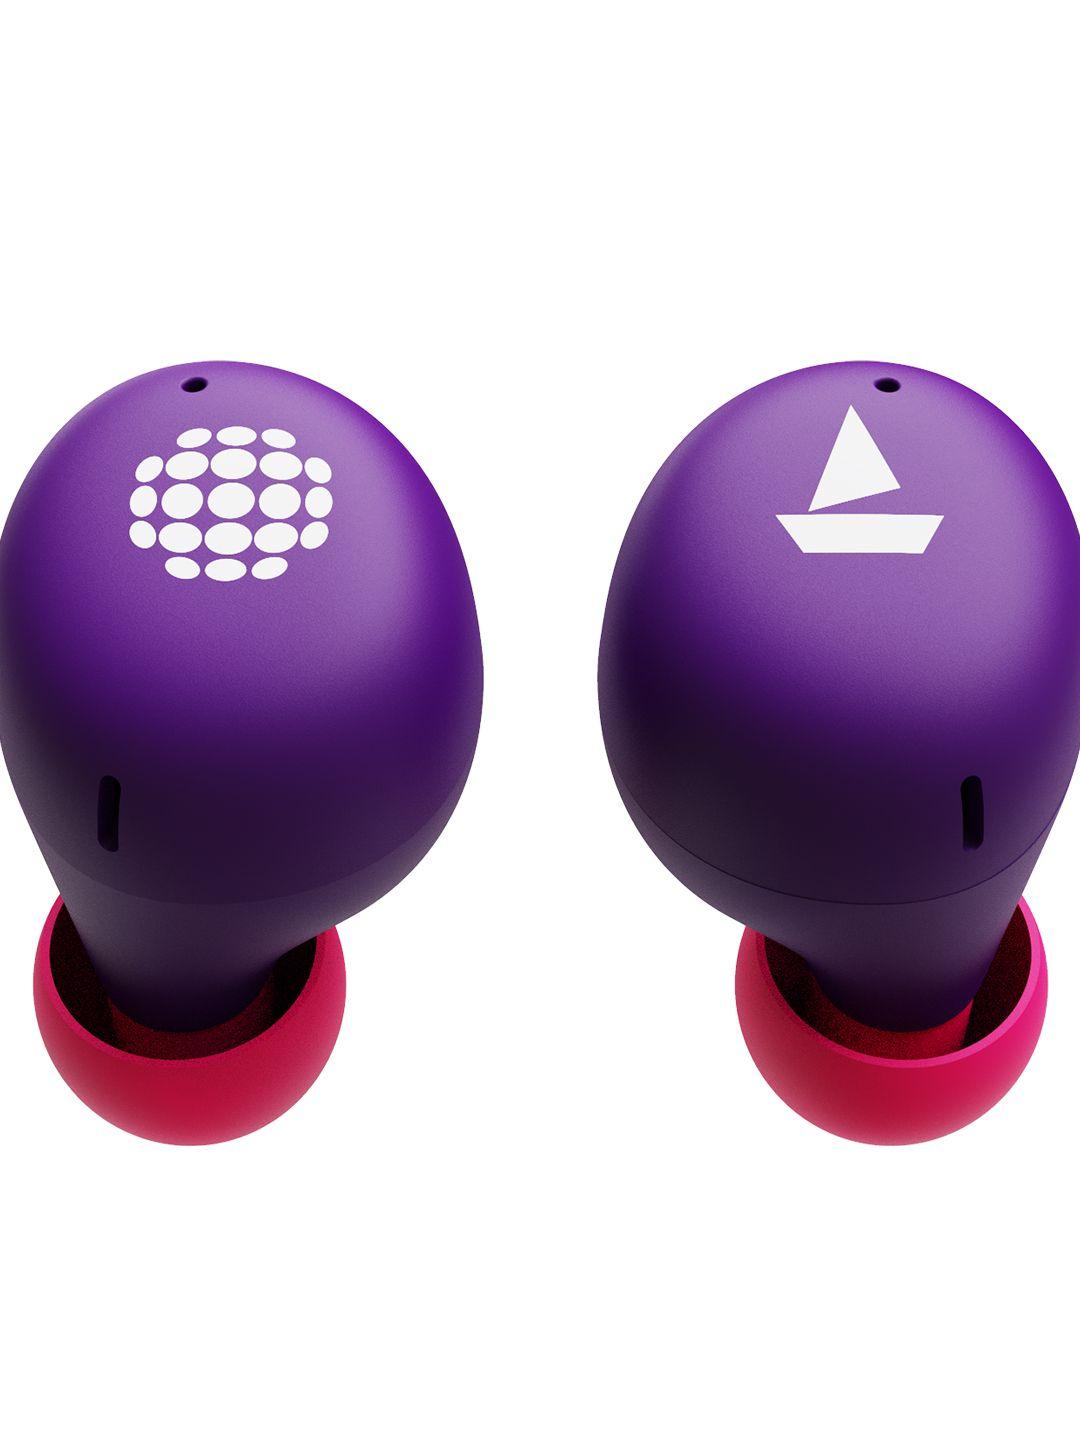 boat airdopes 381 m with upto 20 hours playback tws earbuds - techno purple